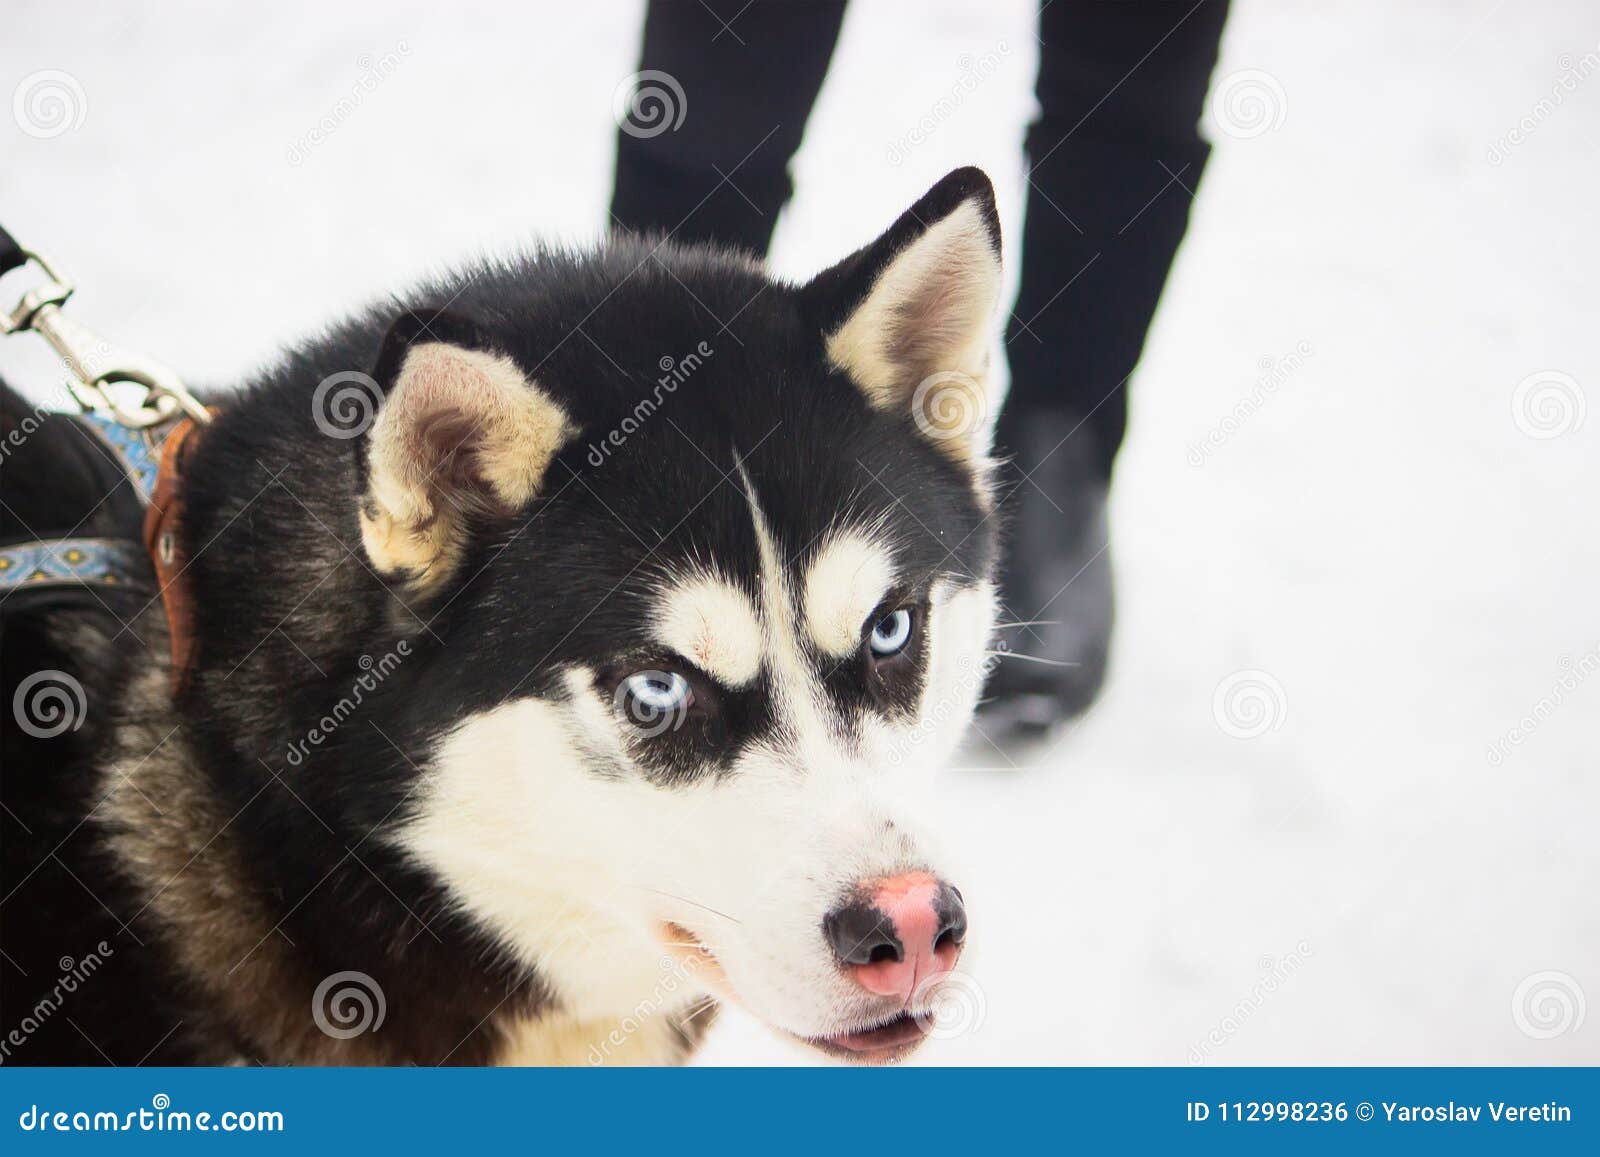 are huskies among restrchives